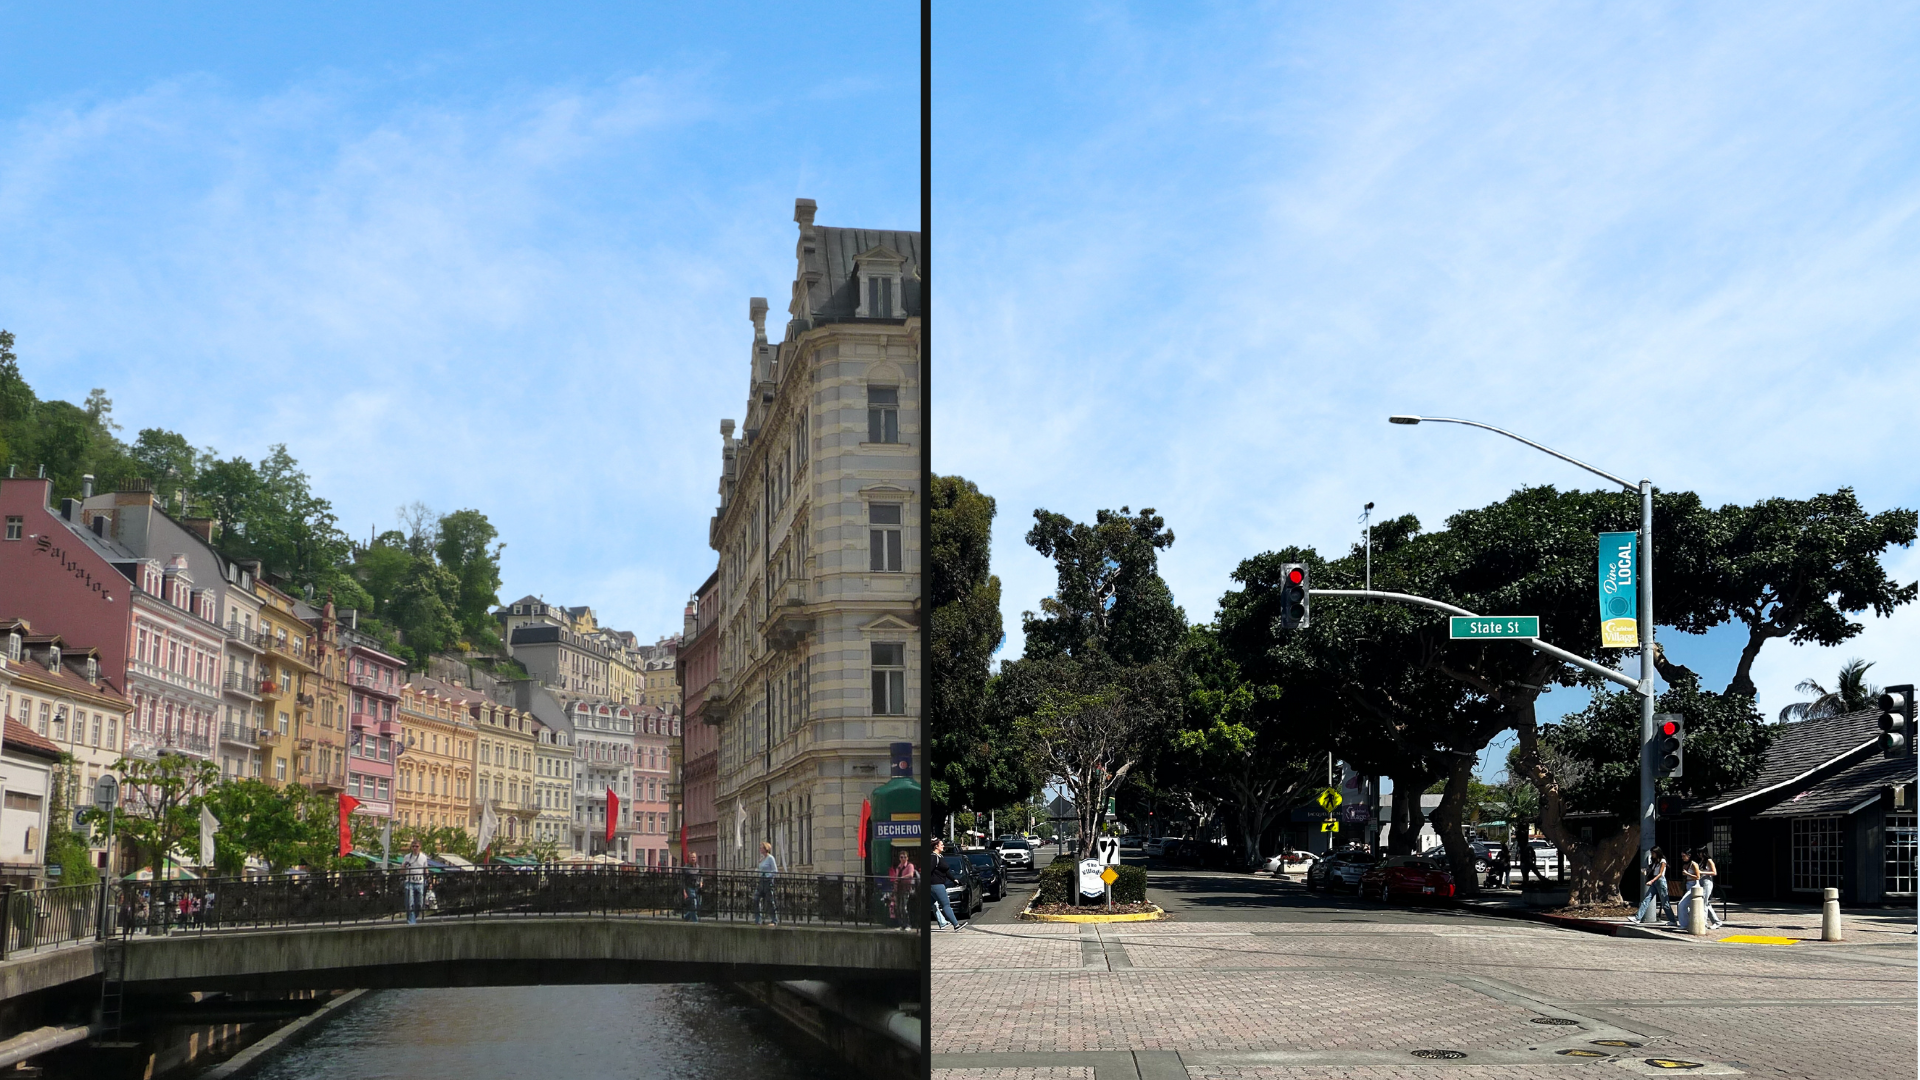 The contrast between the center of Karlovy Vary (on the left) and Carlsbads downtown (on the right) is quite striking. Karlovy Vary boasts cobblestone streets designed for walking, while Carlsbads city center consists of asphalt roads filled with cars.